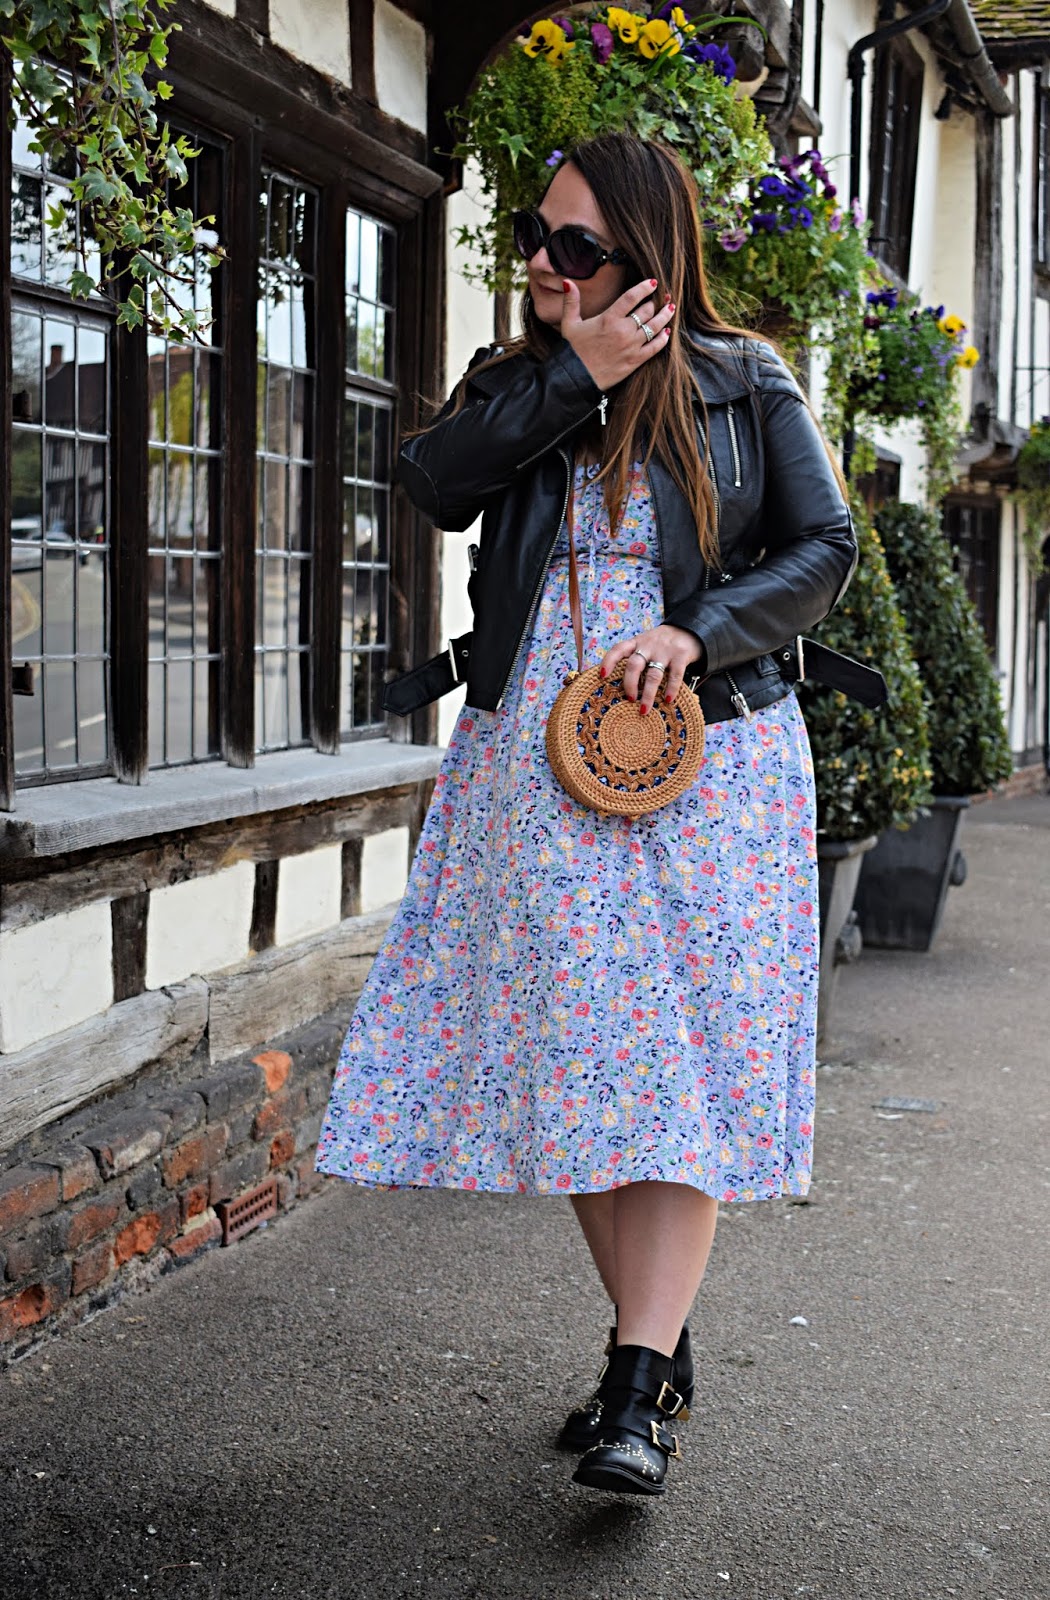 How to wear florals when you're not a girly girl